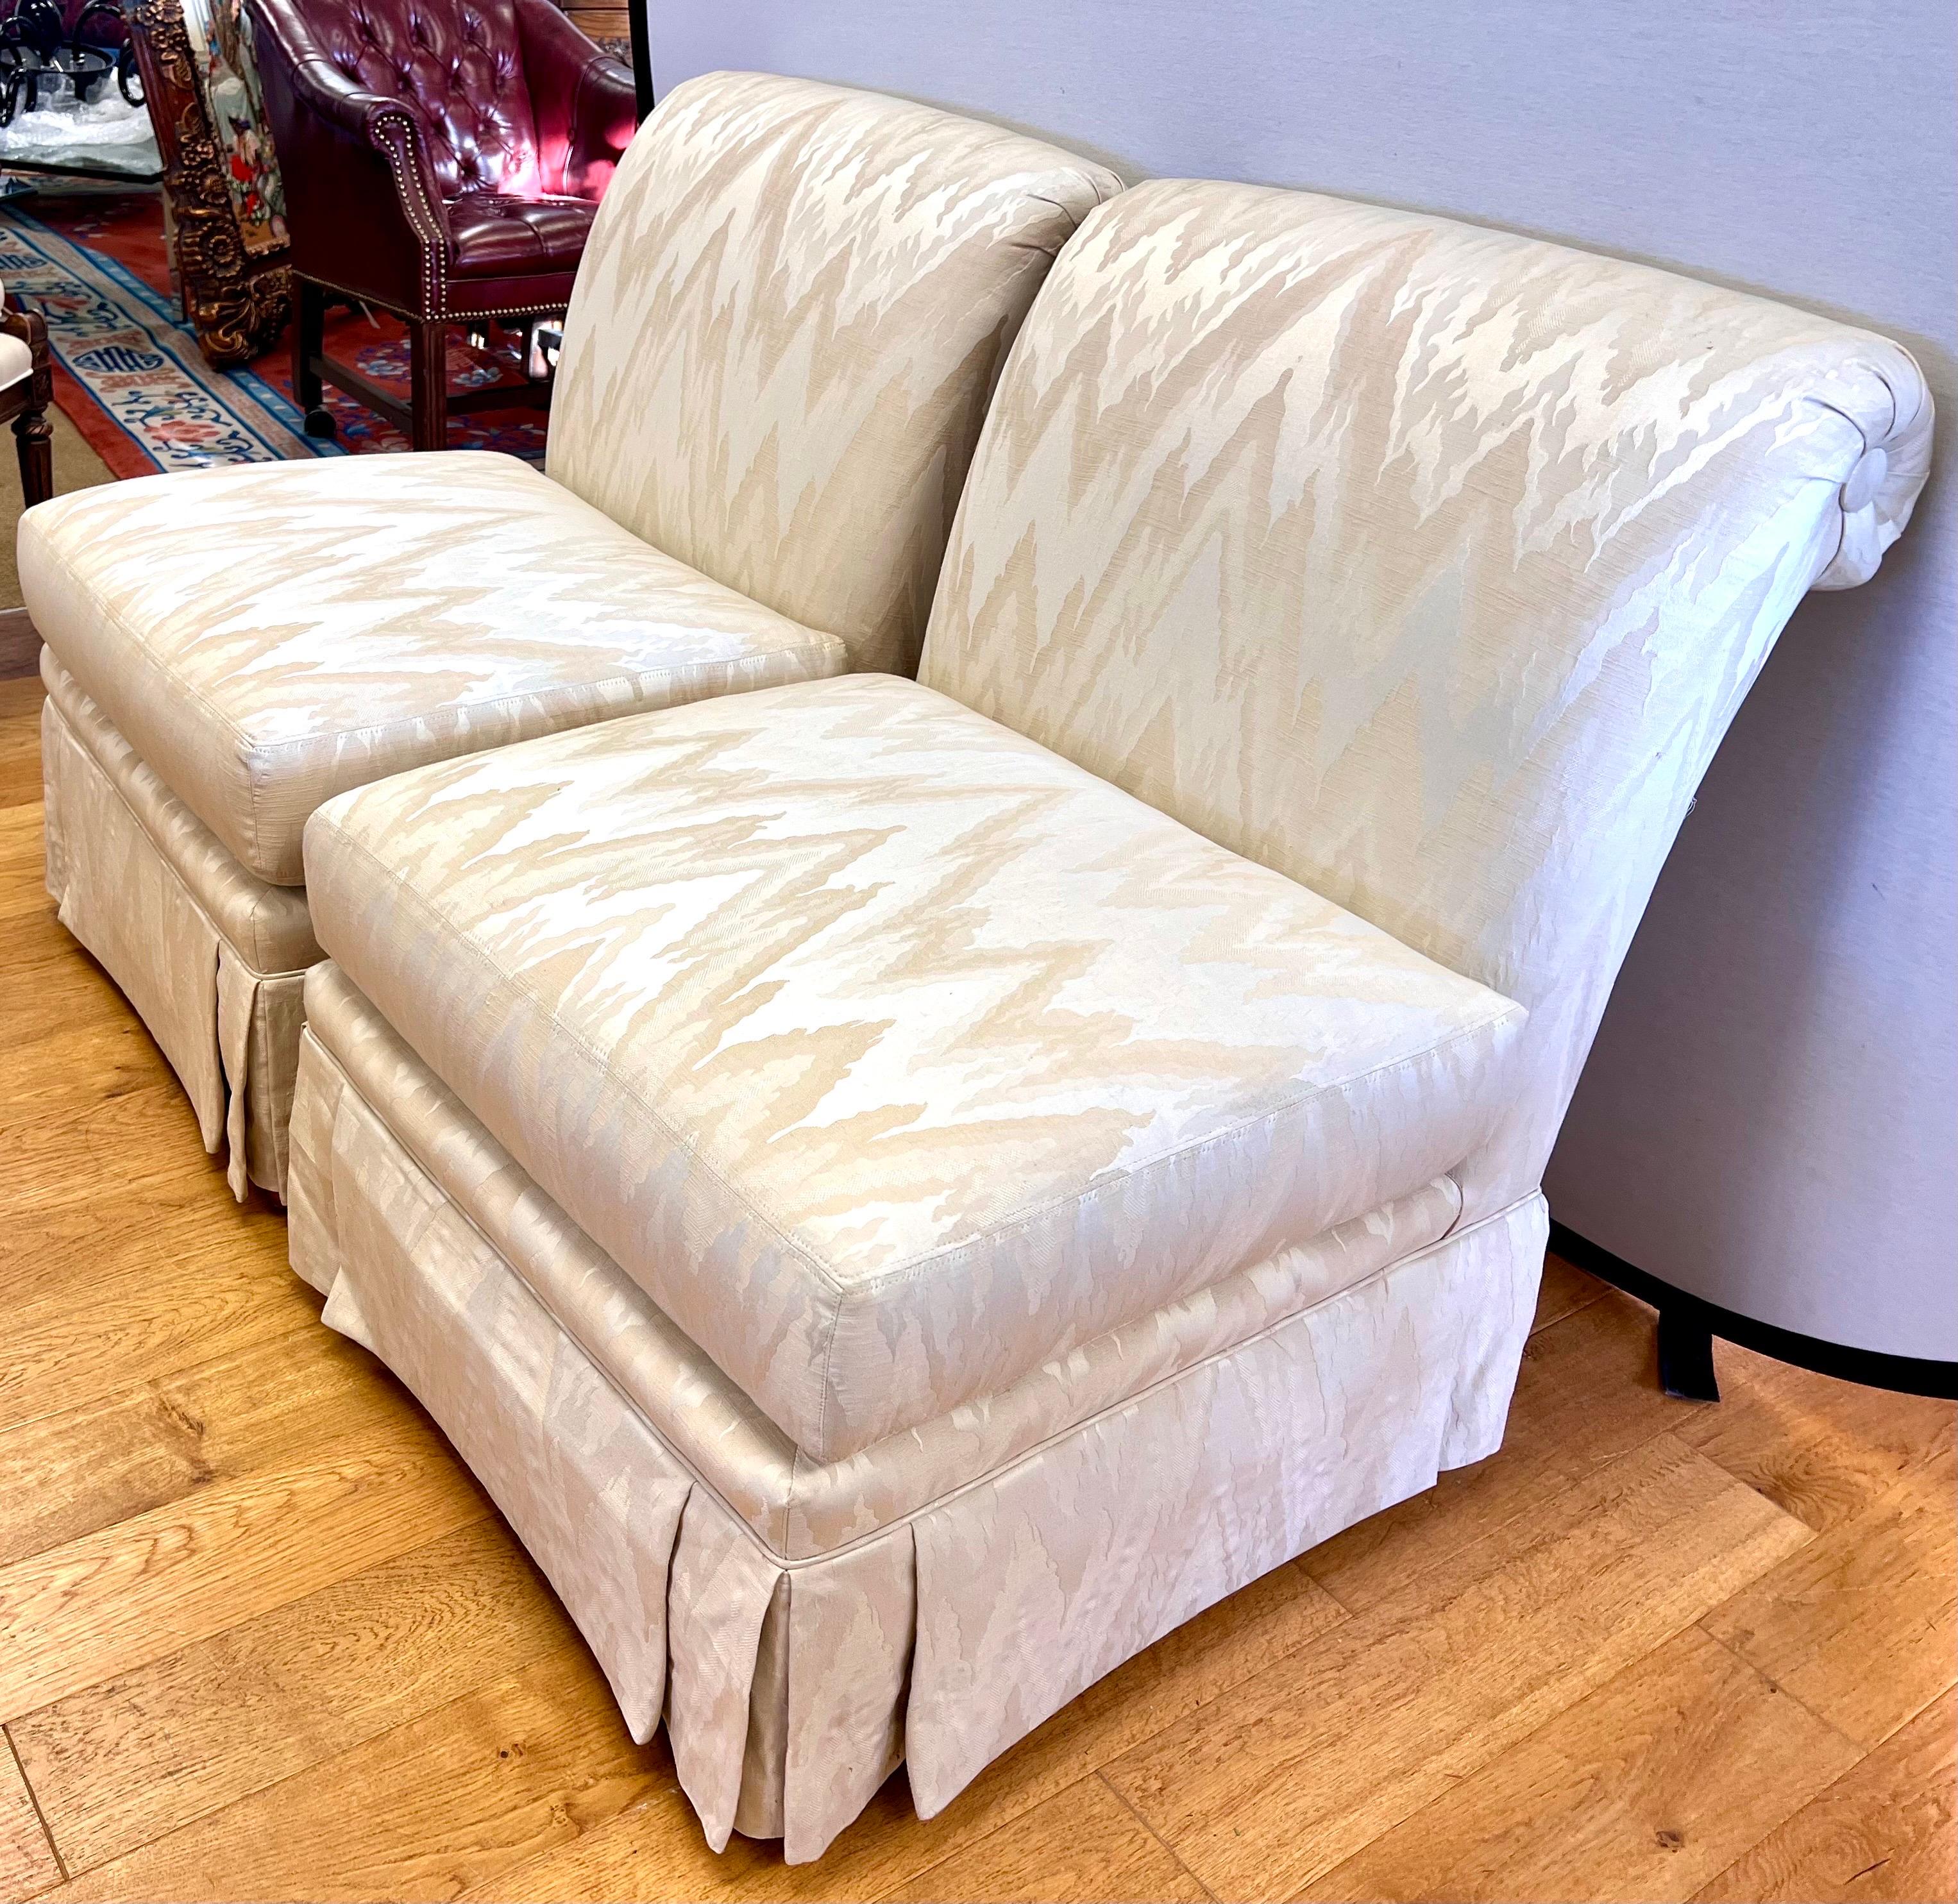 Elegant pair of Henredon signed slipper chairs that have custom upholstery in a silk chevron pattern will rolled back arm and skirt.  They are gorgeous with great scale and better lines.  We understand that shipping prices have risen but please